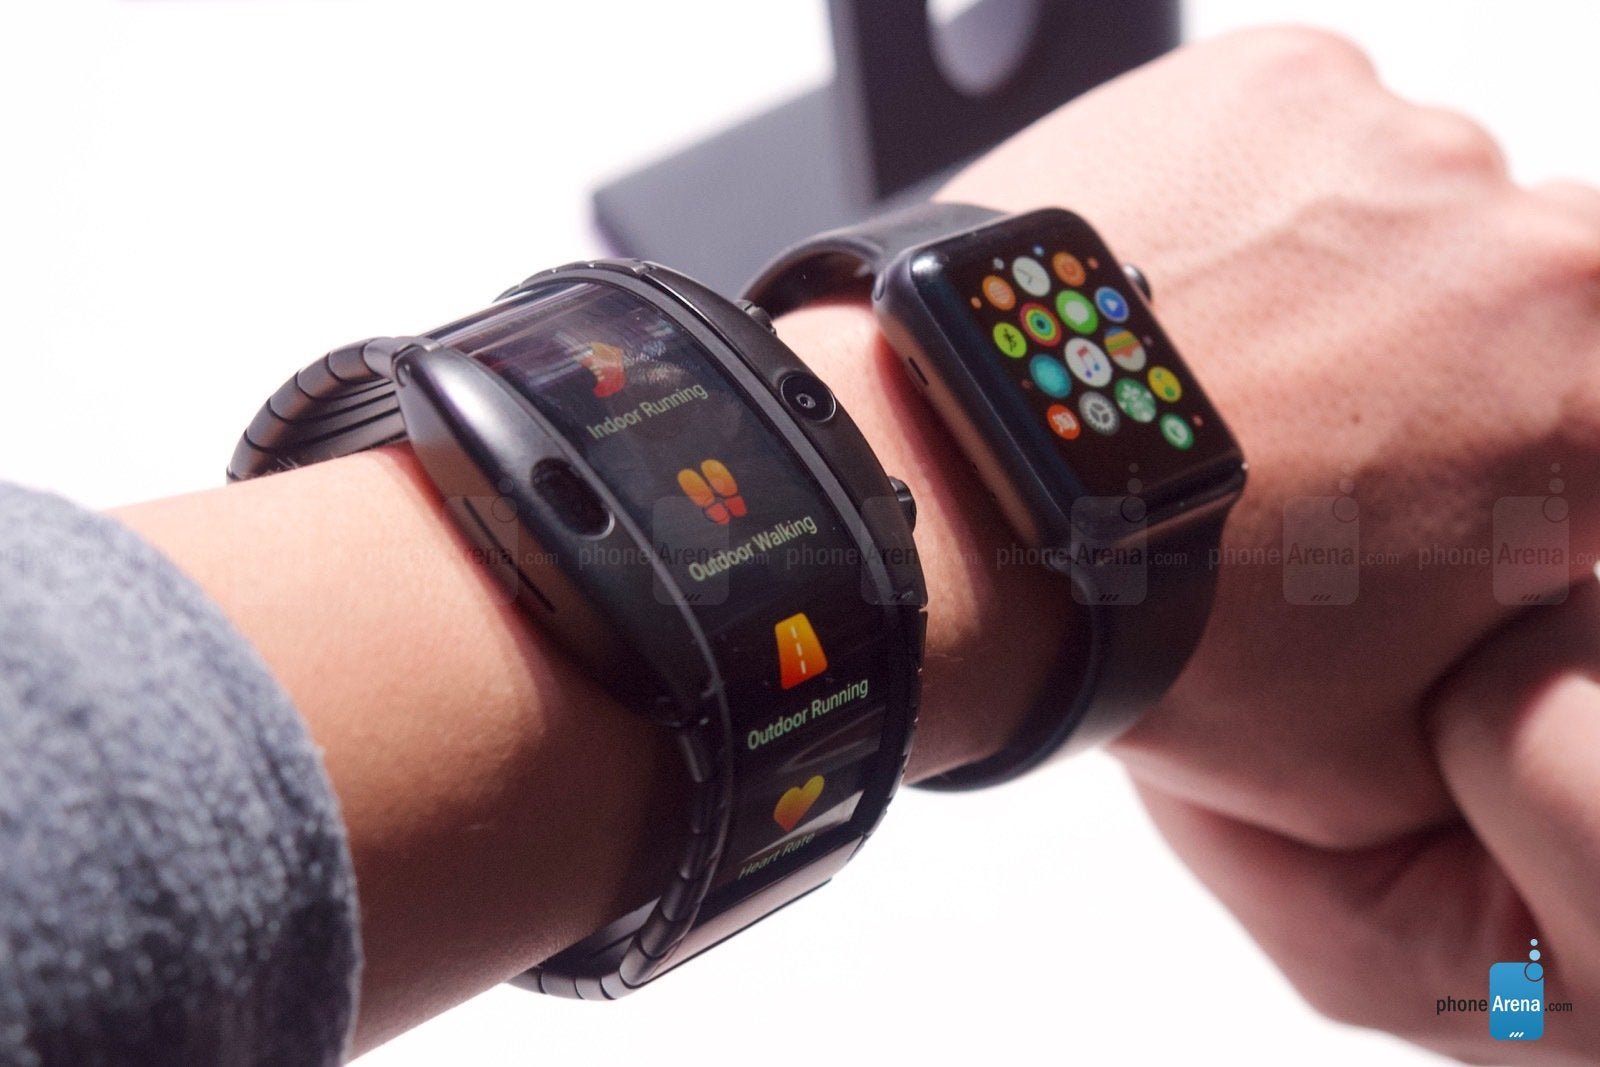 A wearable phone with flexible OLED display? Thanks, but no